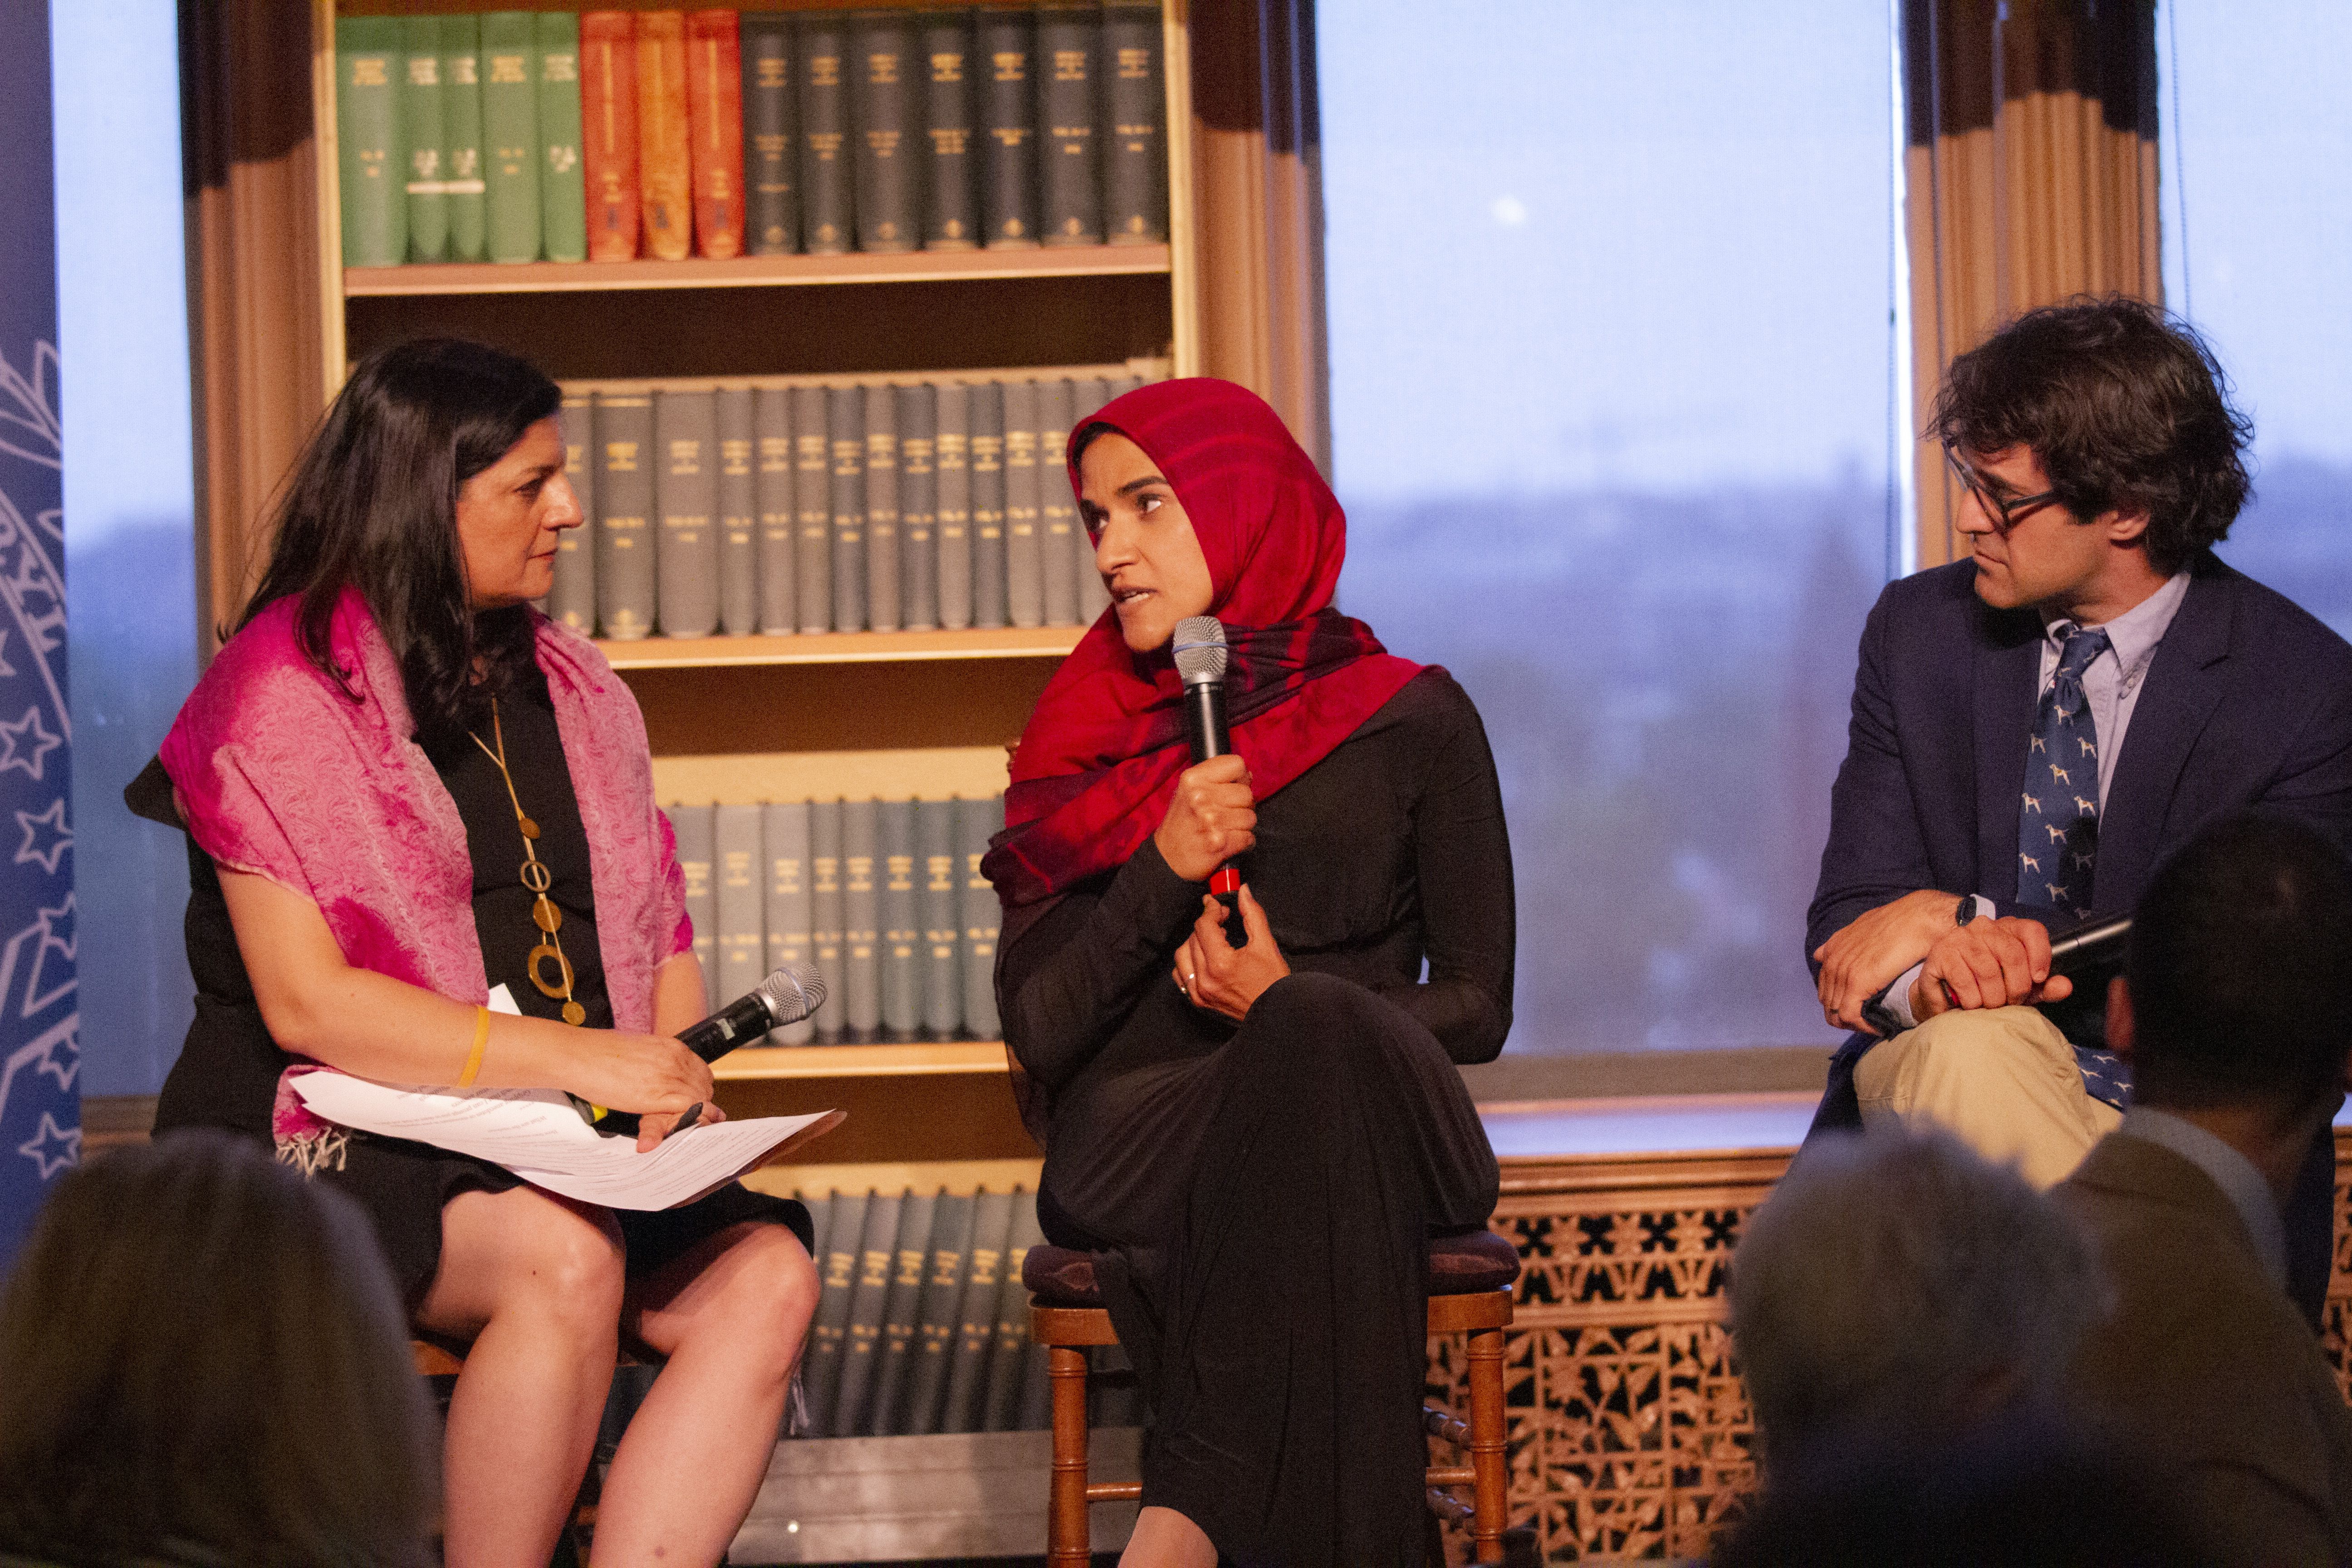 From left to right: Pulitzer Center Executive Editor Indira Lakshmanan (moderator), Institute for Social Policy and Understanding Research Director Dalia Mogahed, and Mark Oppenheimer, coordinator of the Yale Journalism Initiative. Image by Jin Ding. United States, 2019.